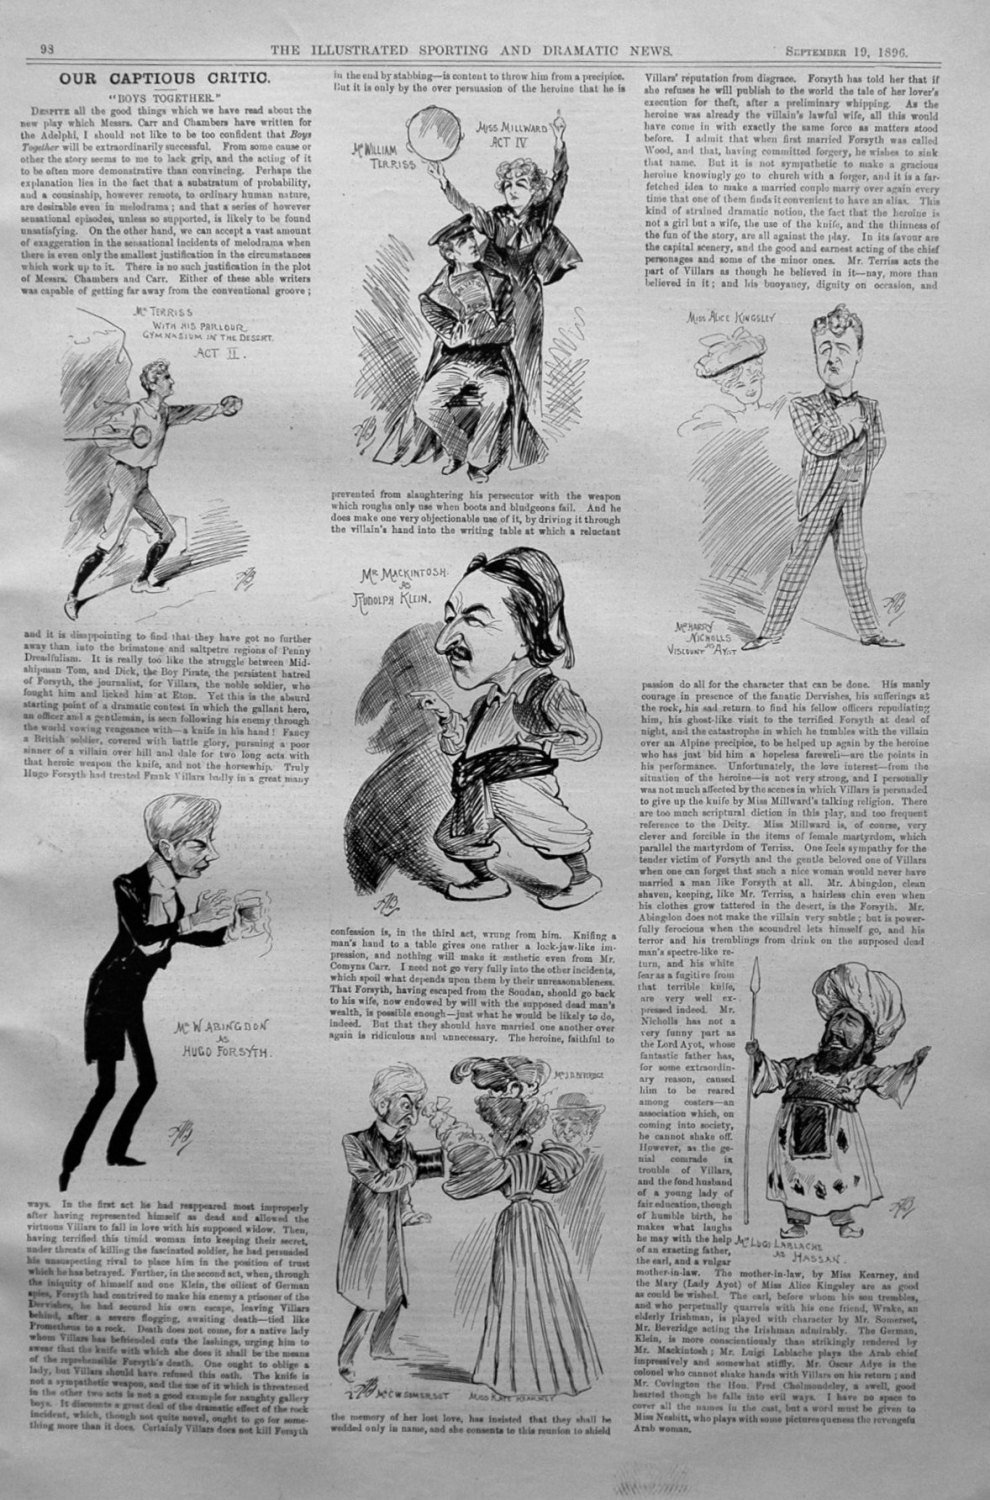 Our Captious Critic, September 19th 1896.